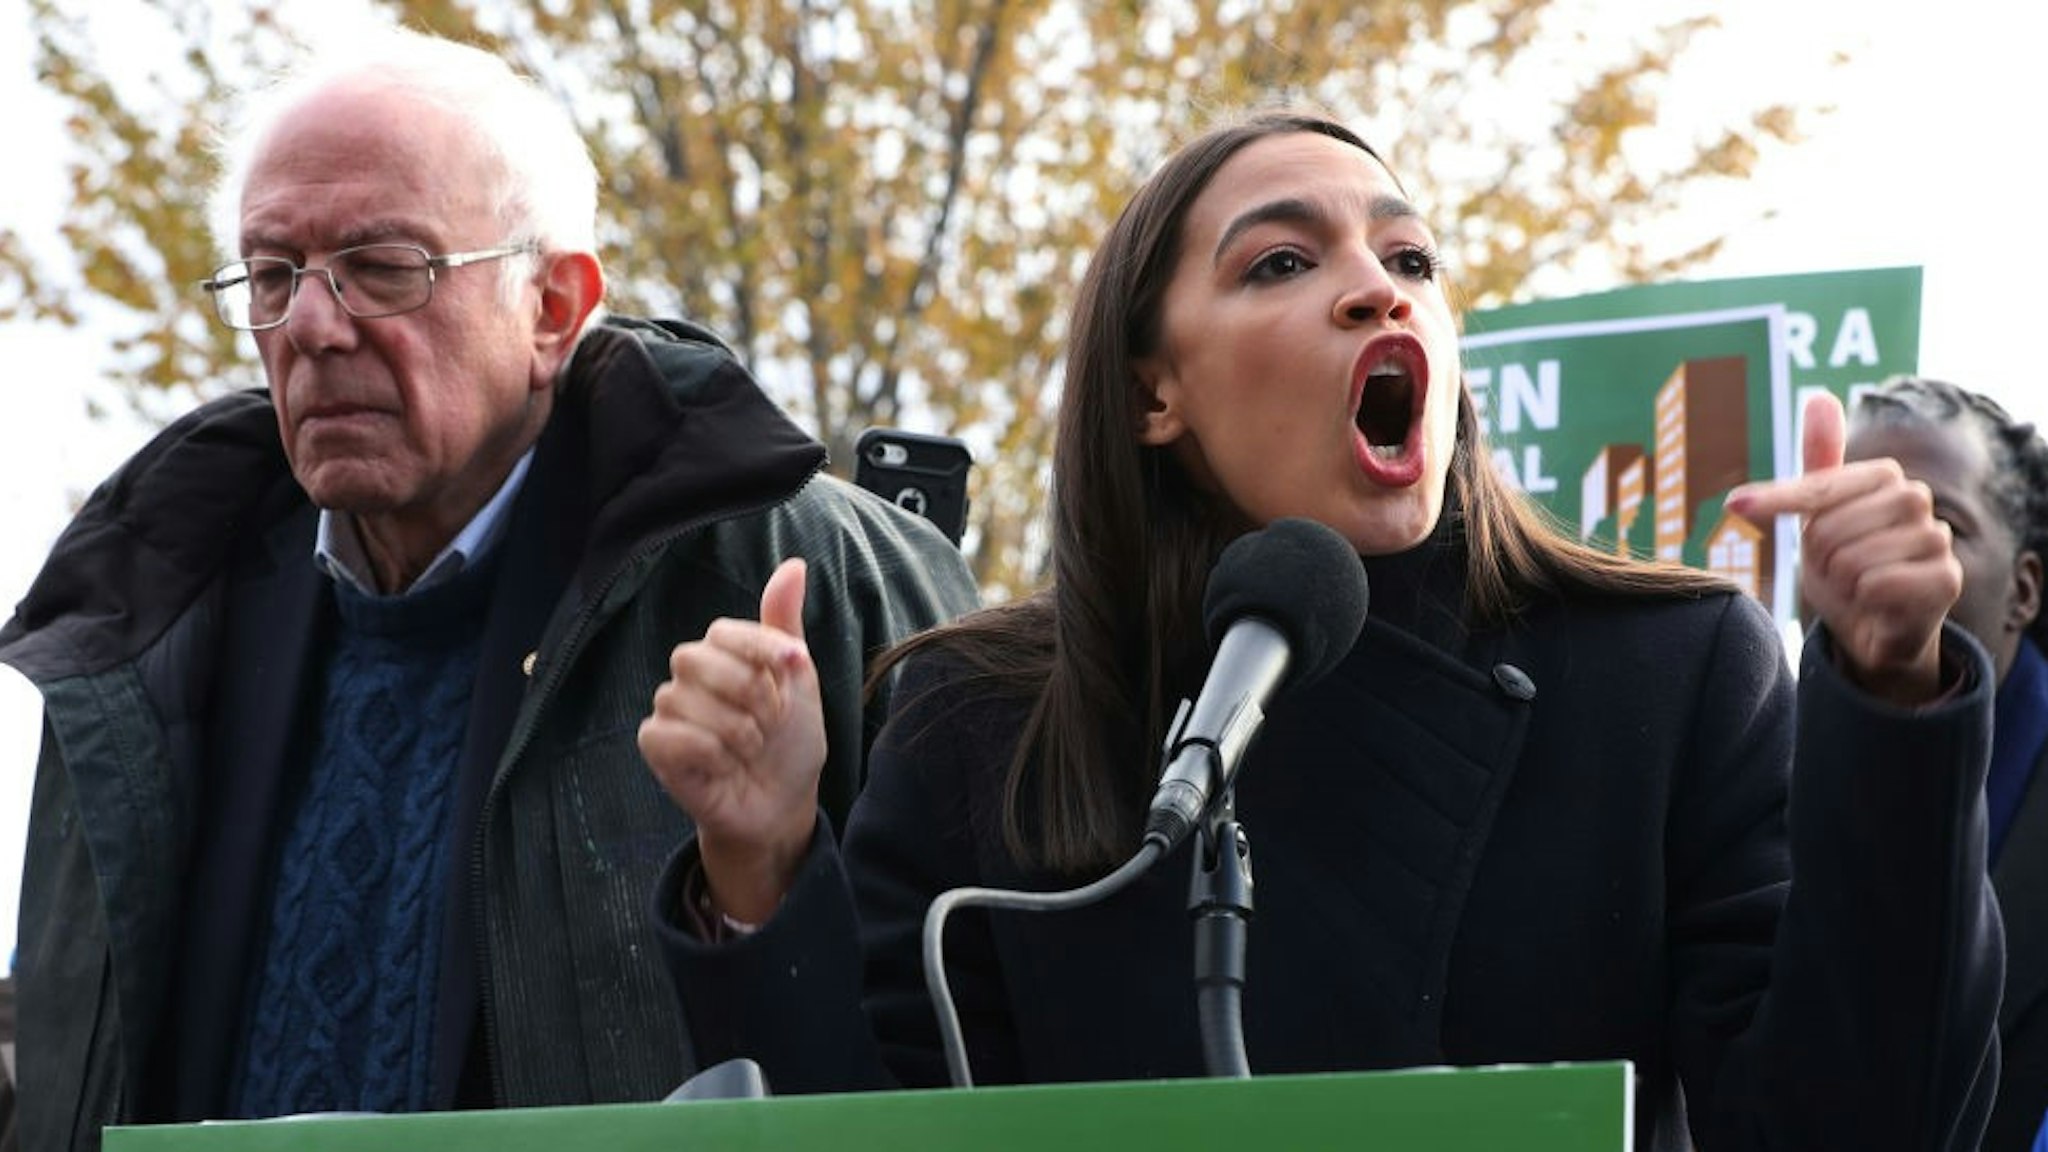 Democratic presidential candidate Sen. Bernie Sanders (I-VT) (L) and Rep. Alexandria Ocasio-Cortez (D-NY) hold a news conference to introduce legislation to transform public housing as part of their Green New Deal proposal outside the U.S. Capitol November 14, 2019 in Washington, DC.